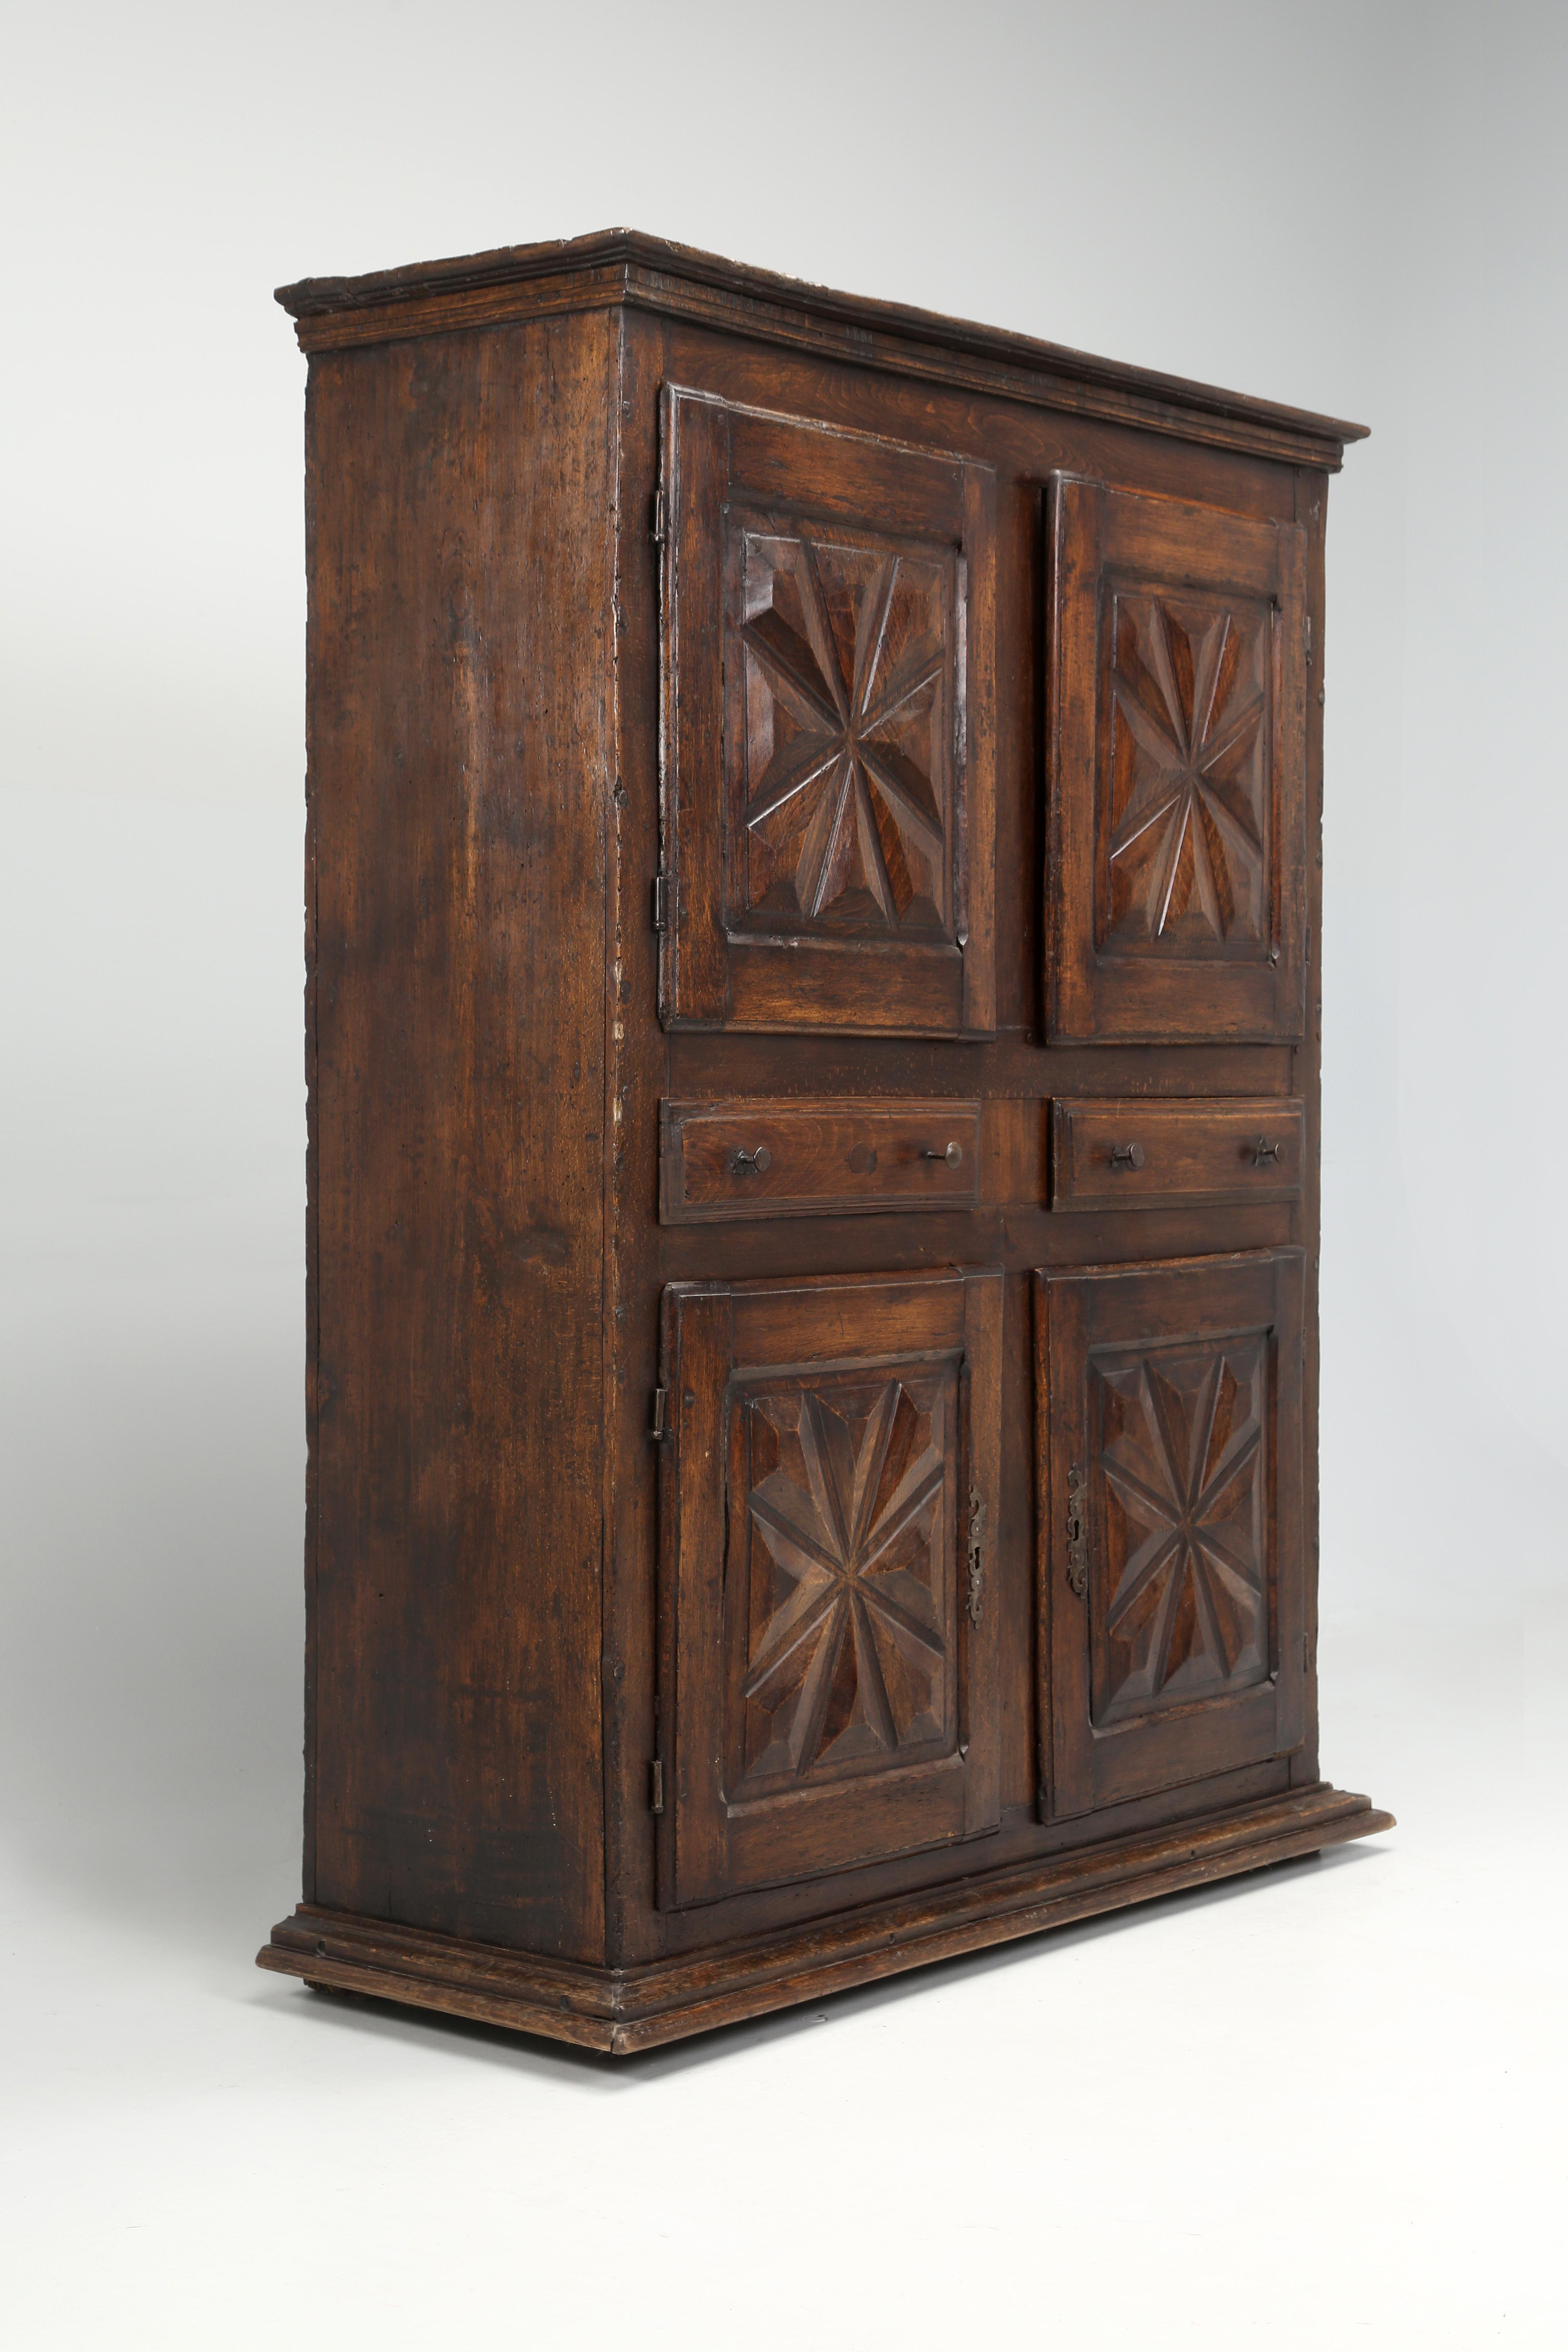 Hand-Carved Antique French Louis XIII Armoire or Cupboard from the Early 1700's